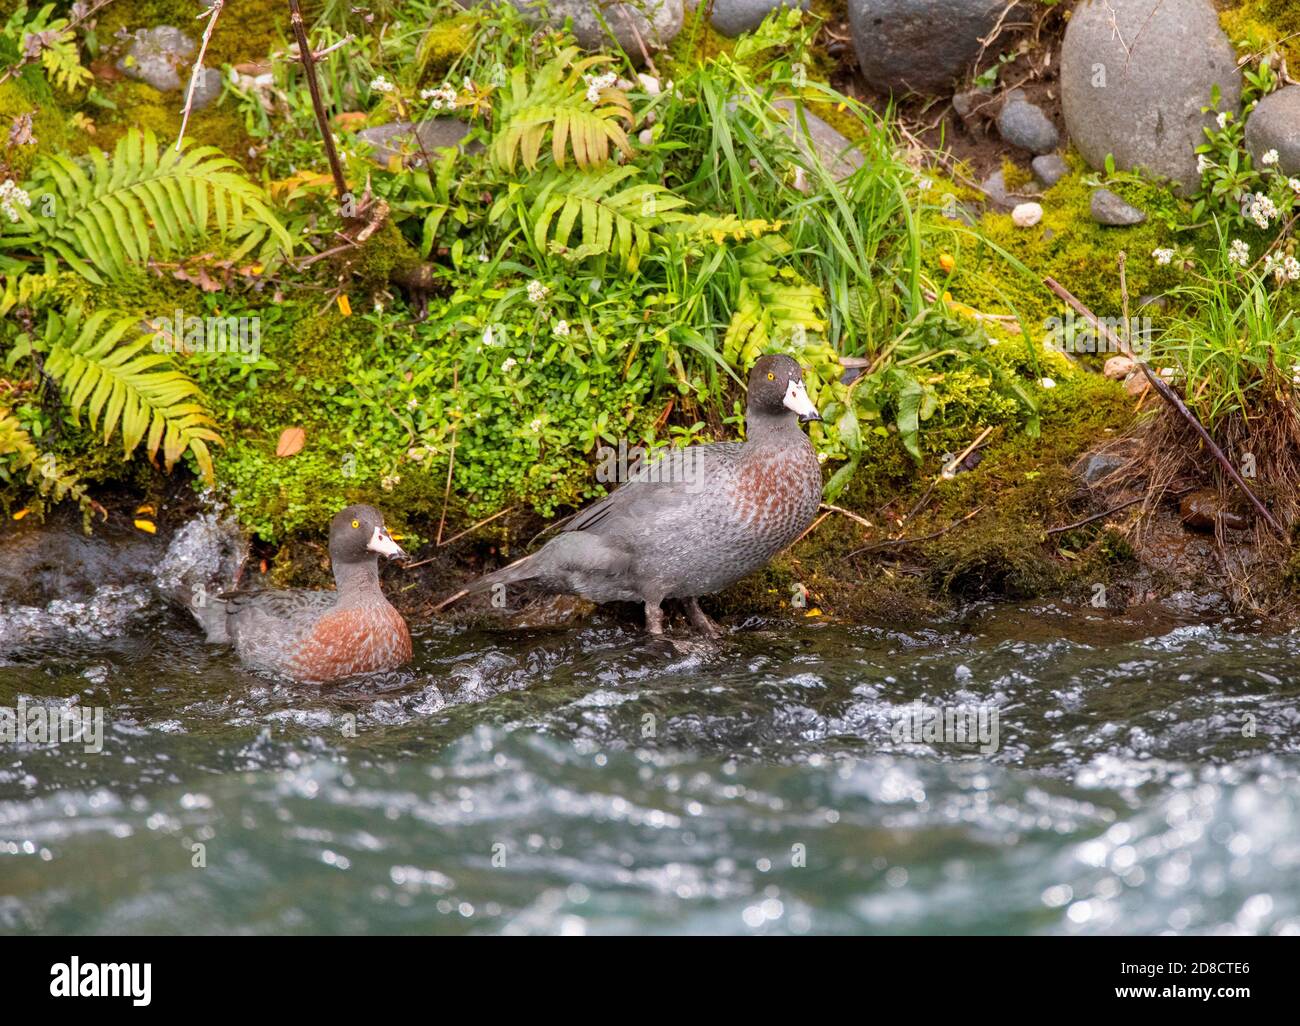 Blue duck, Whio (Hymenolaimus malacorhynchos), pair standing at a lush green bank along a fast flowing river, New Zealand, Northern Island, Turangi Stock Photo